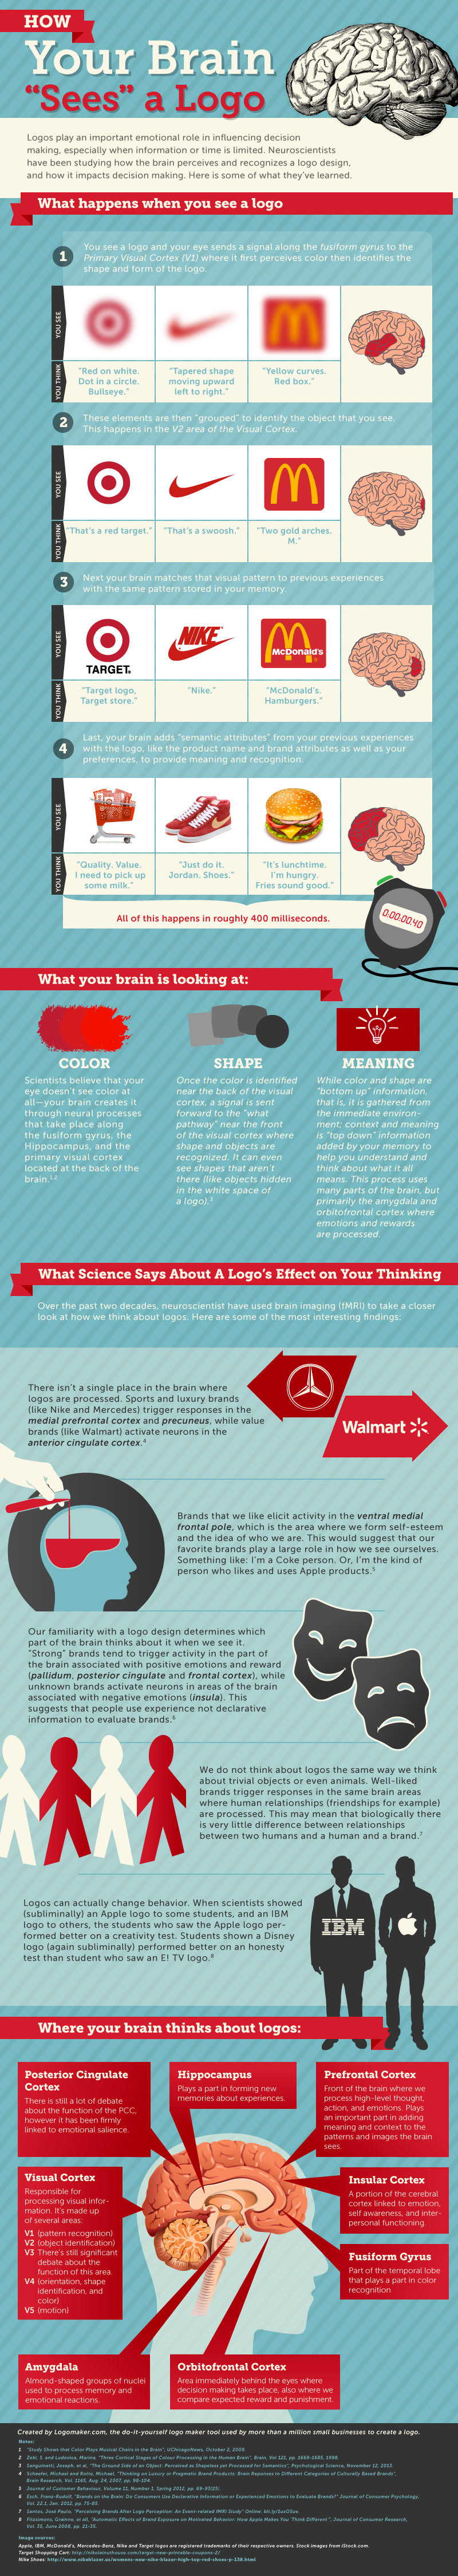 how-your-brain-sees-logo-infographic